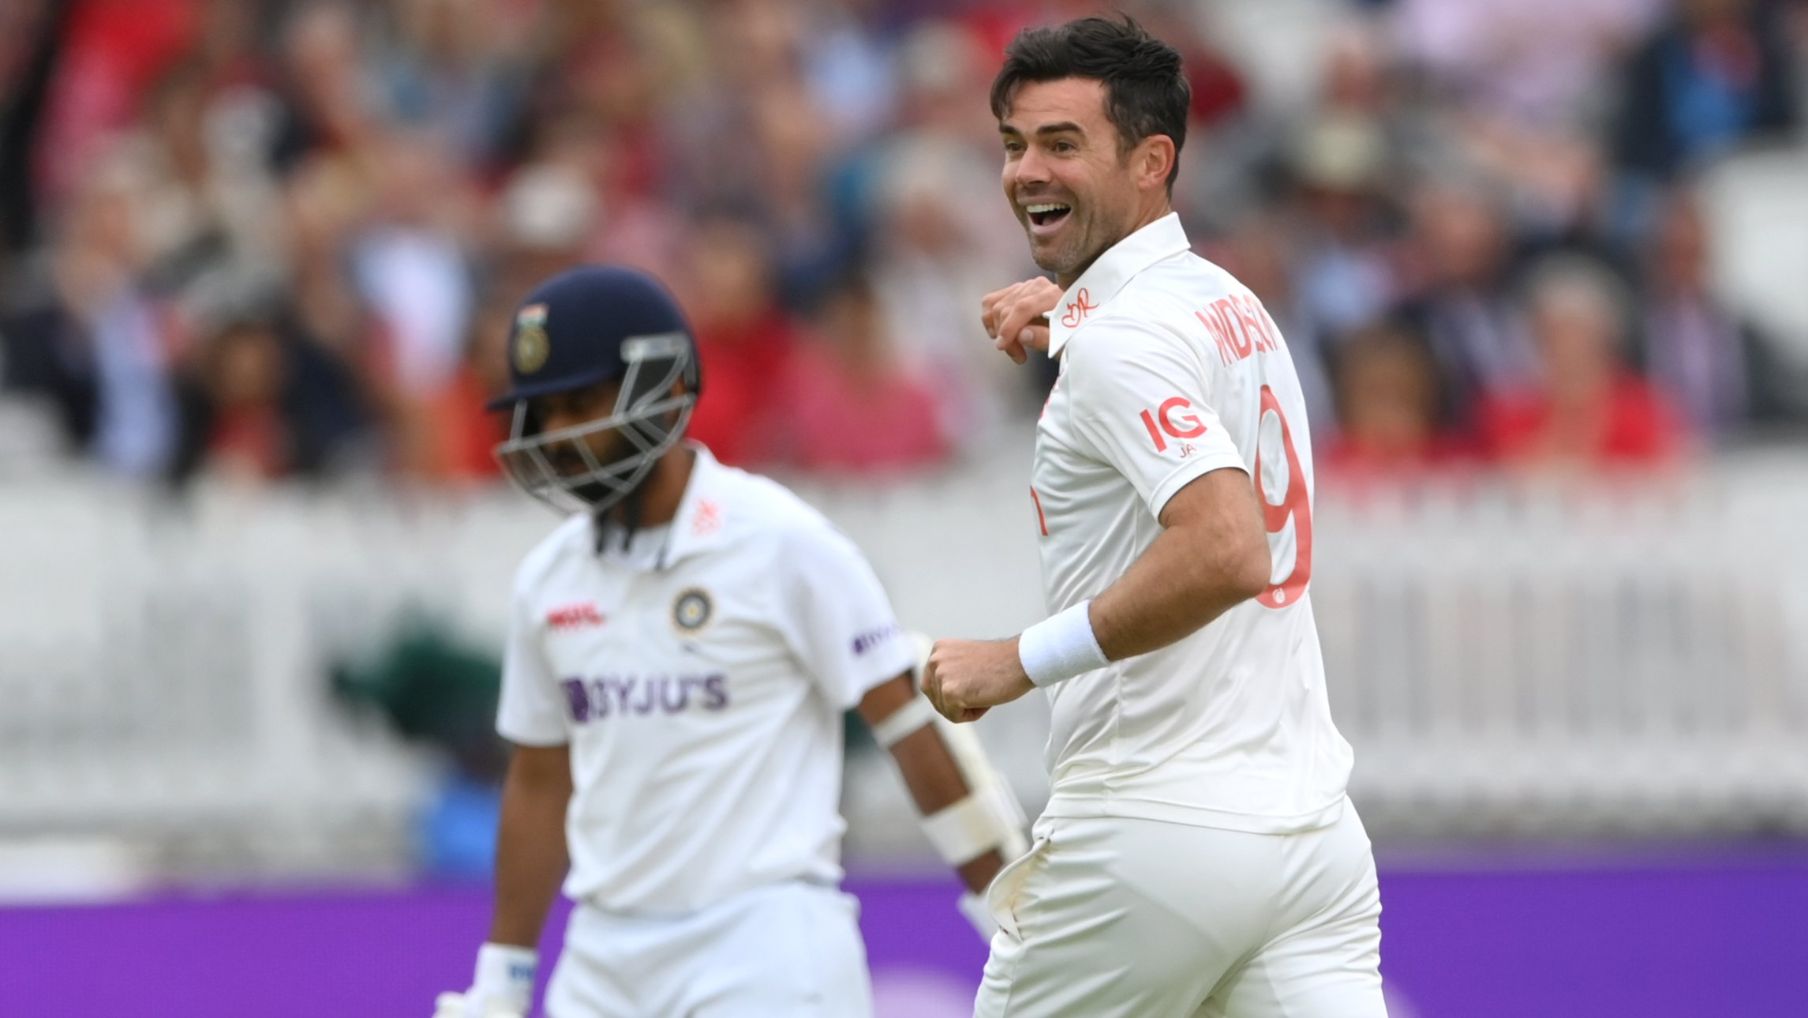 ENG vs IND | Lord's Test: James Anderson picks up 31st five-wicket haul